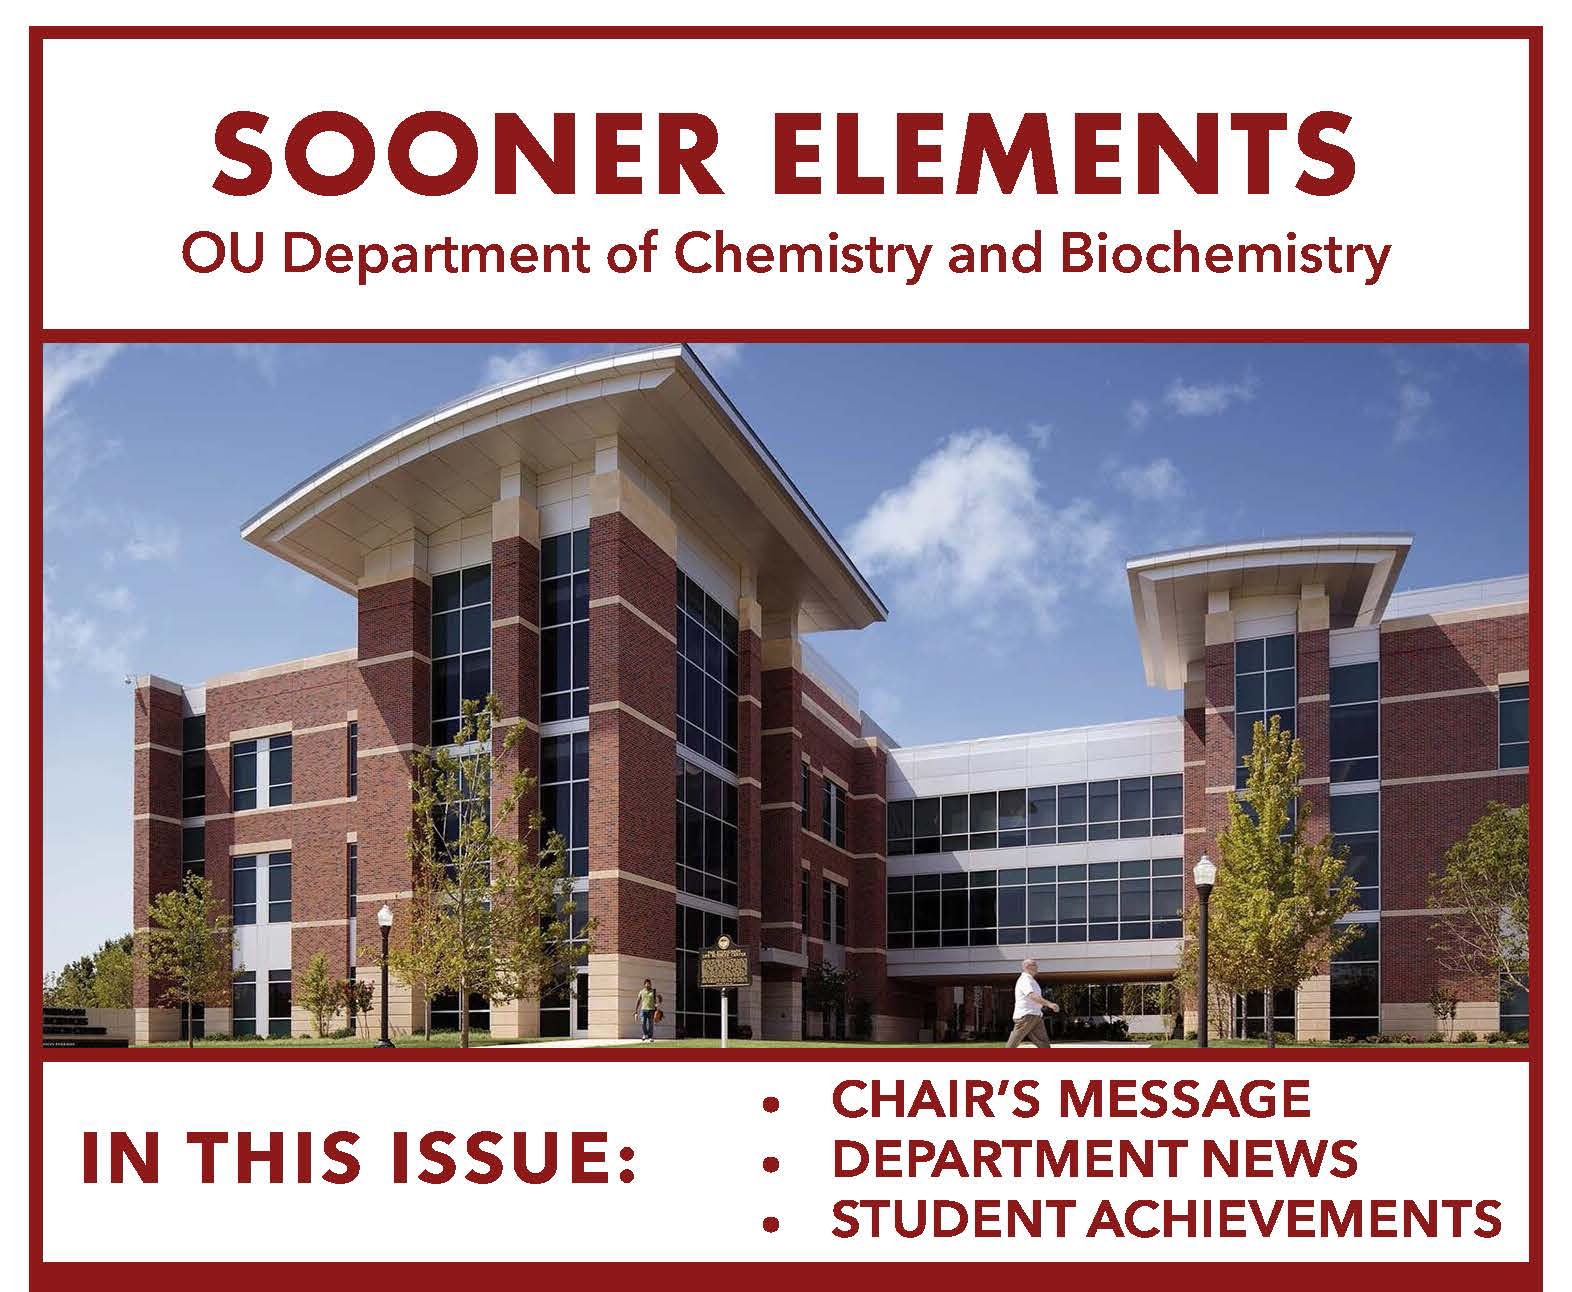 Sooner Elements OU Department of Chemistry and Biochemistry, In this issue: chair's message, department news, student achievements